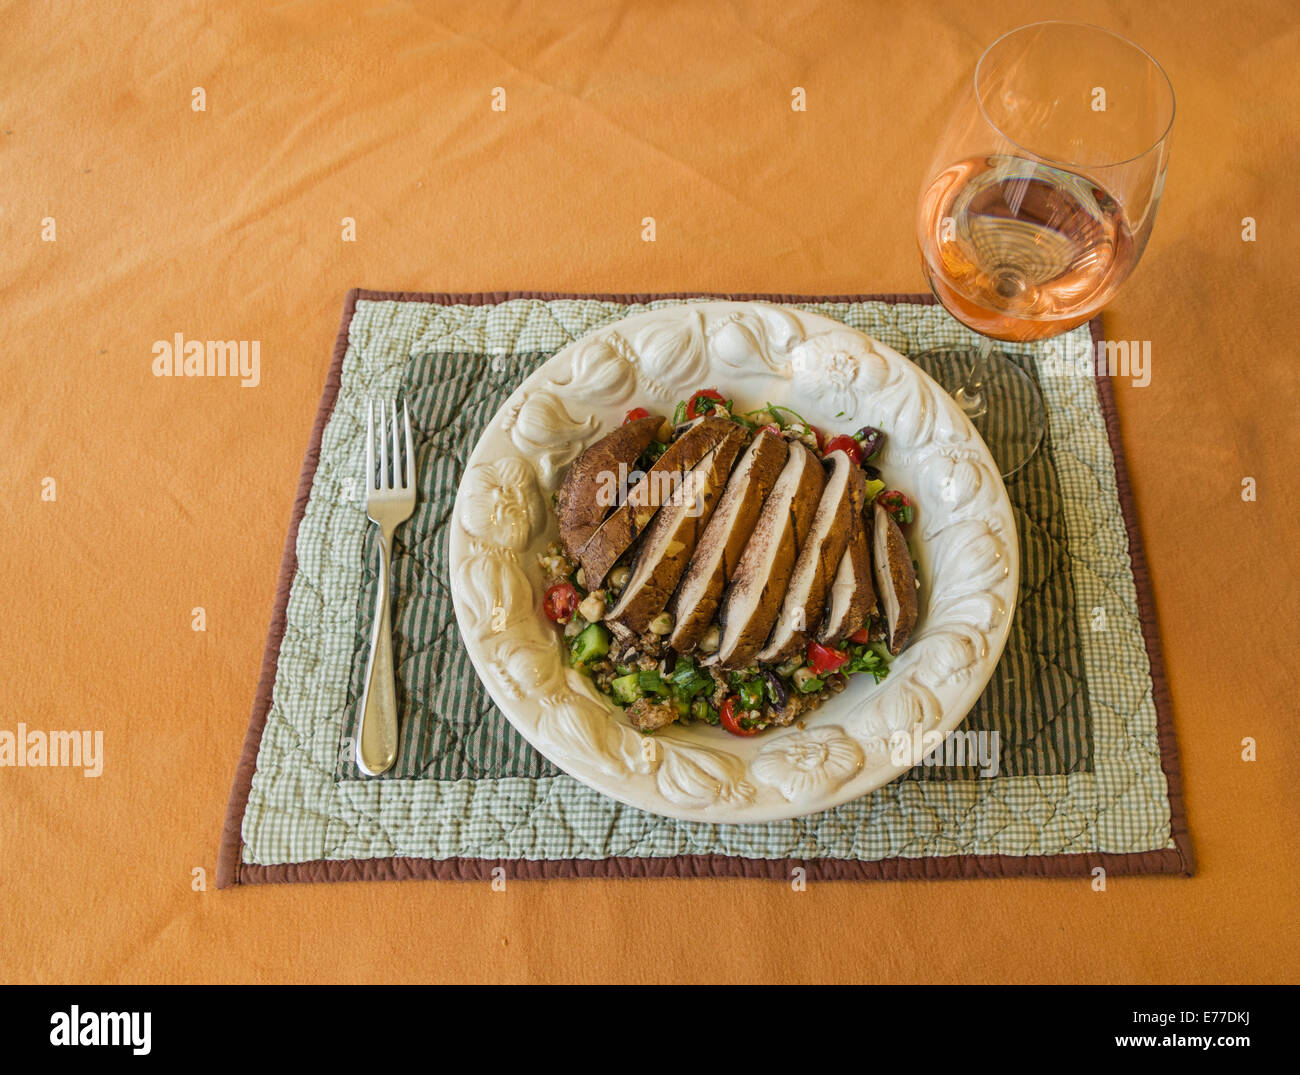 grilled portobello mushroom and tabouleh salad with a glass of wine Stock Photo